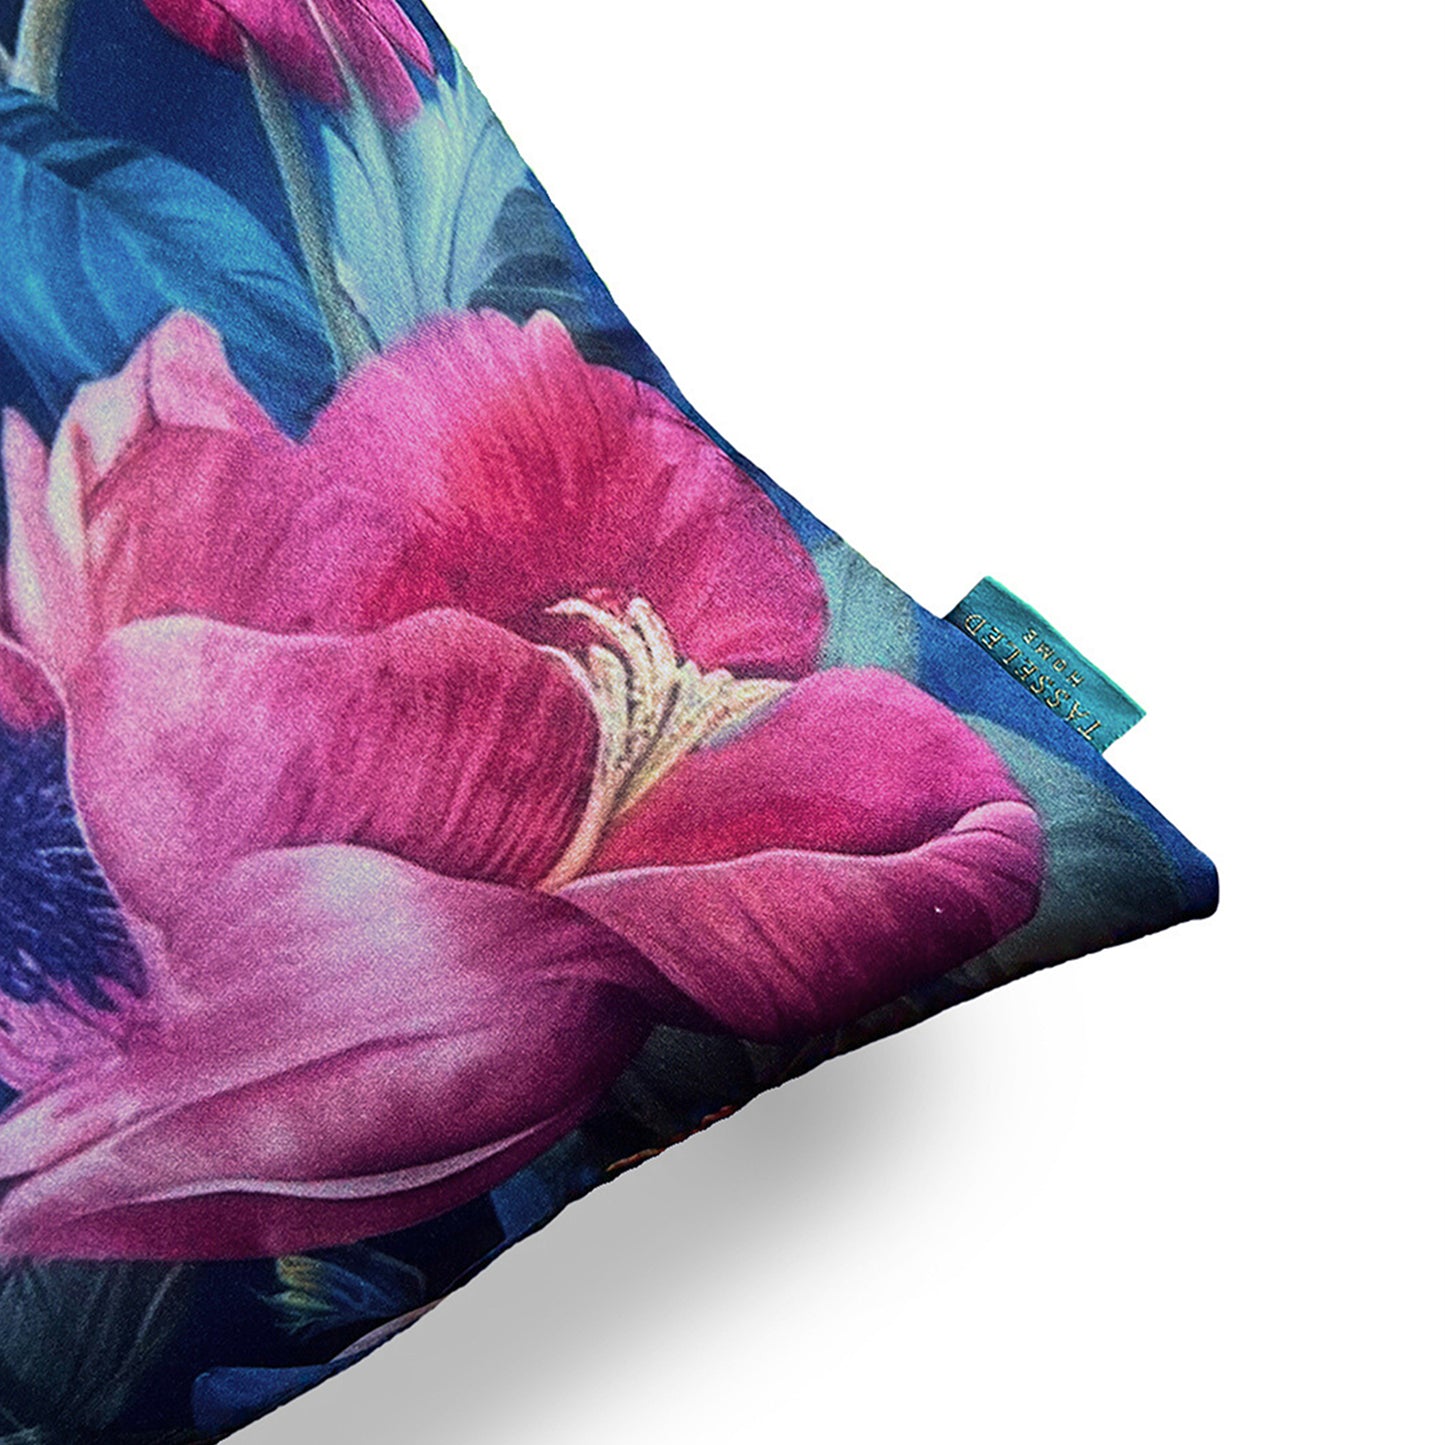 Floral Orchid Cushion Covers